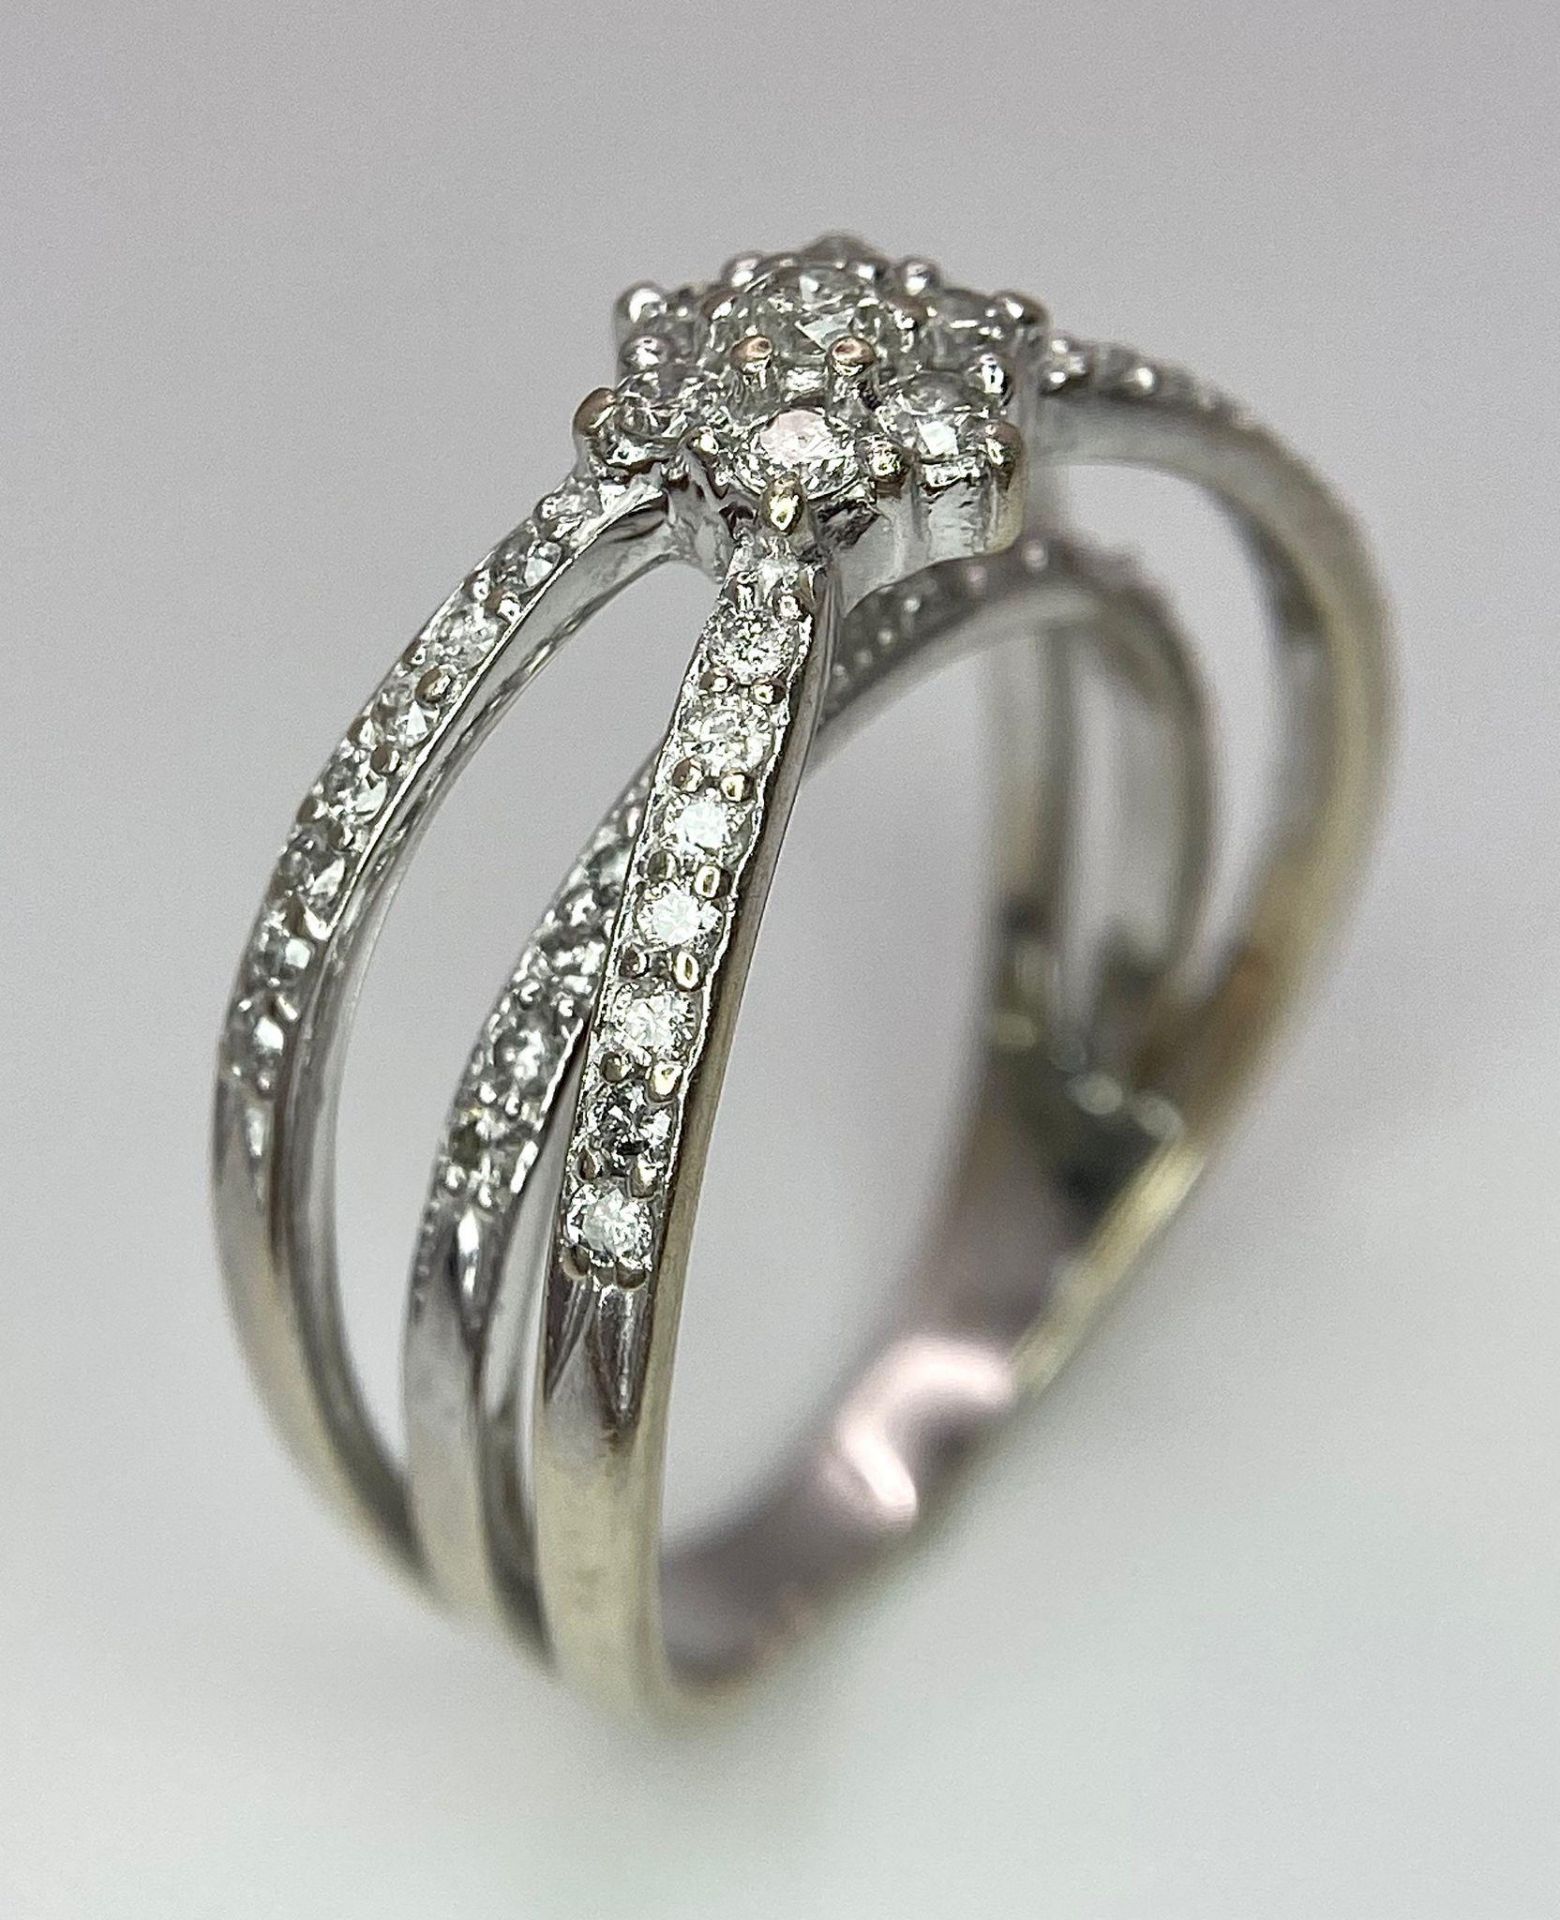 A UNIQUE DESIGNED 18K WHITE GOLD DIAMOND SPLIT RING, APPROX 0.40CT DIAMONDS, WEIGHT 4.9G SIZE O - Image 4 of 6